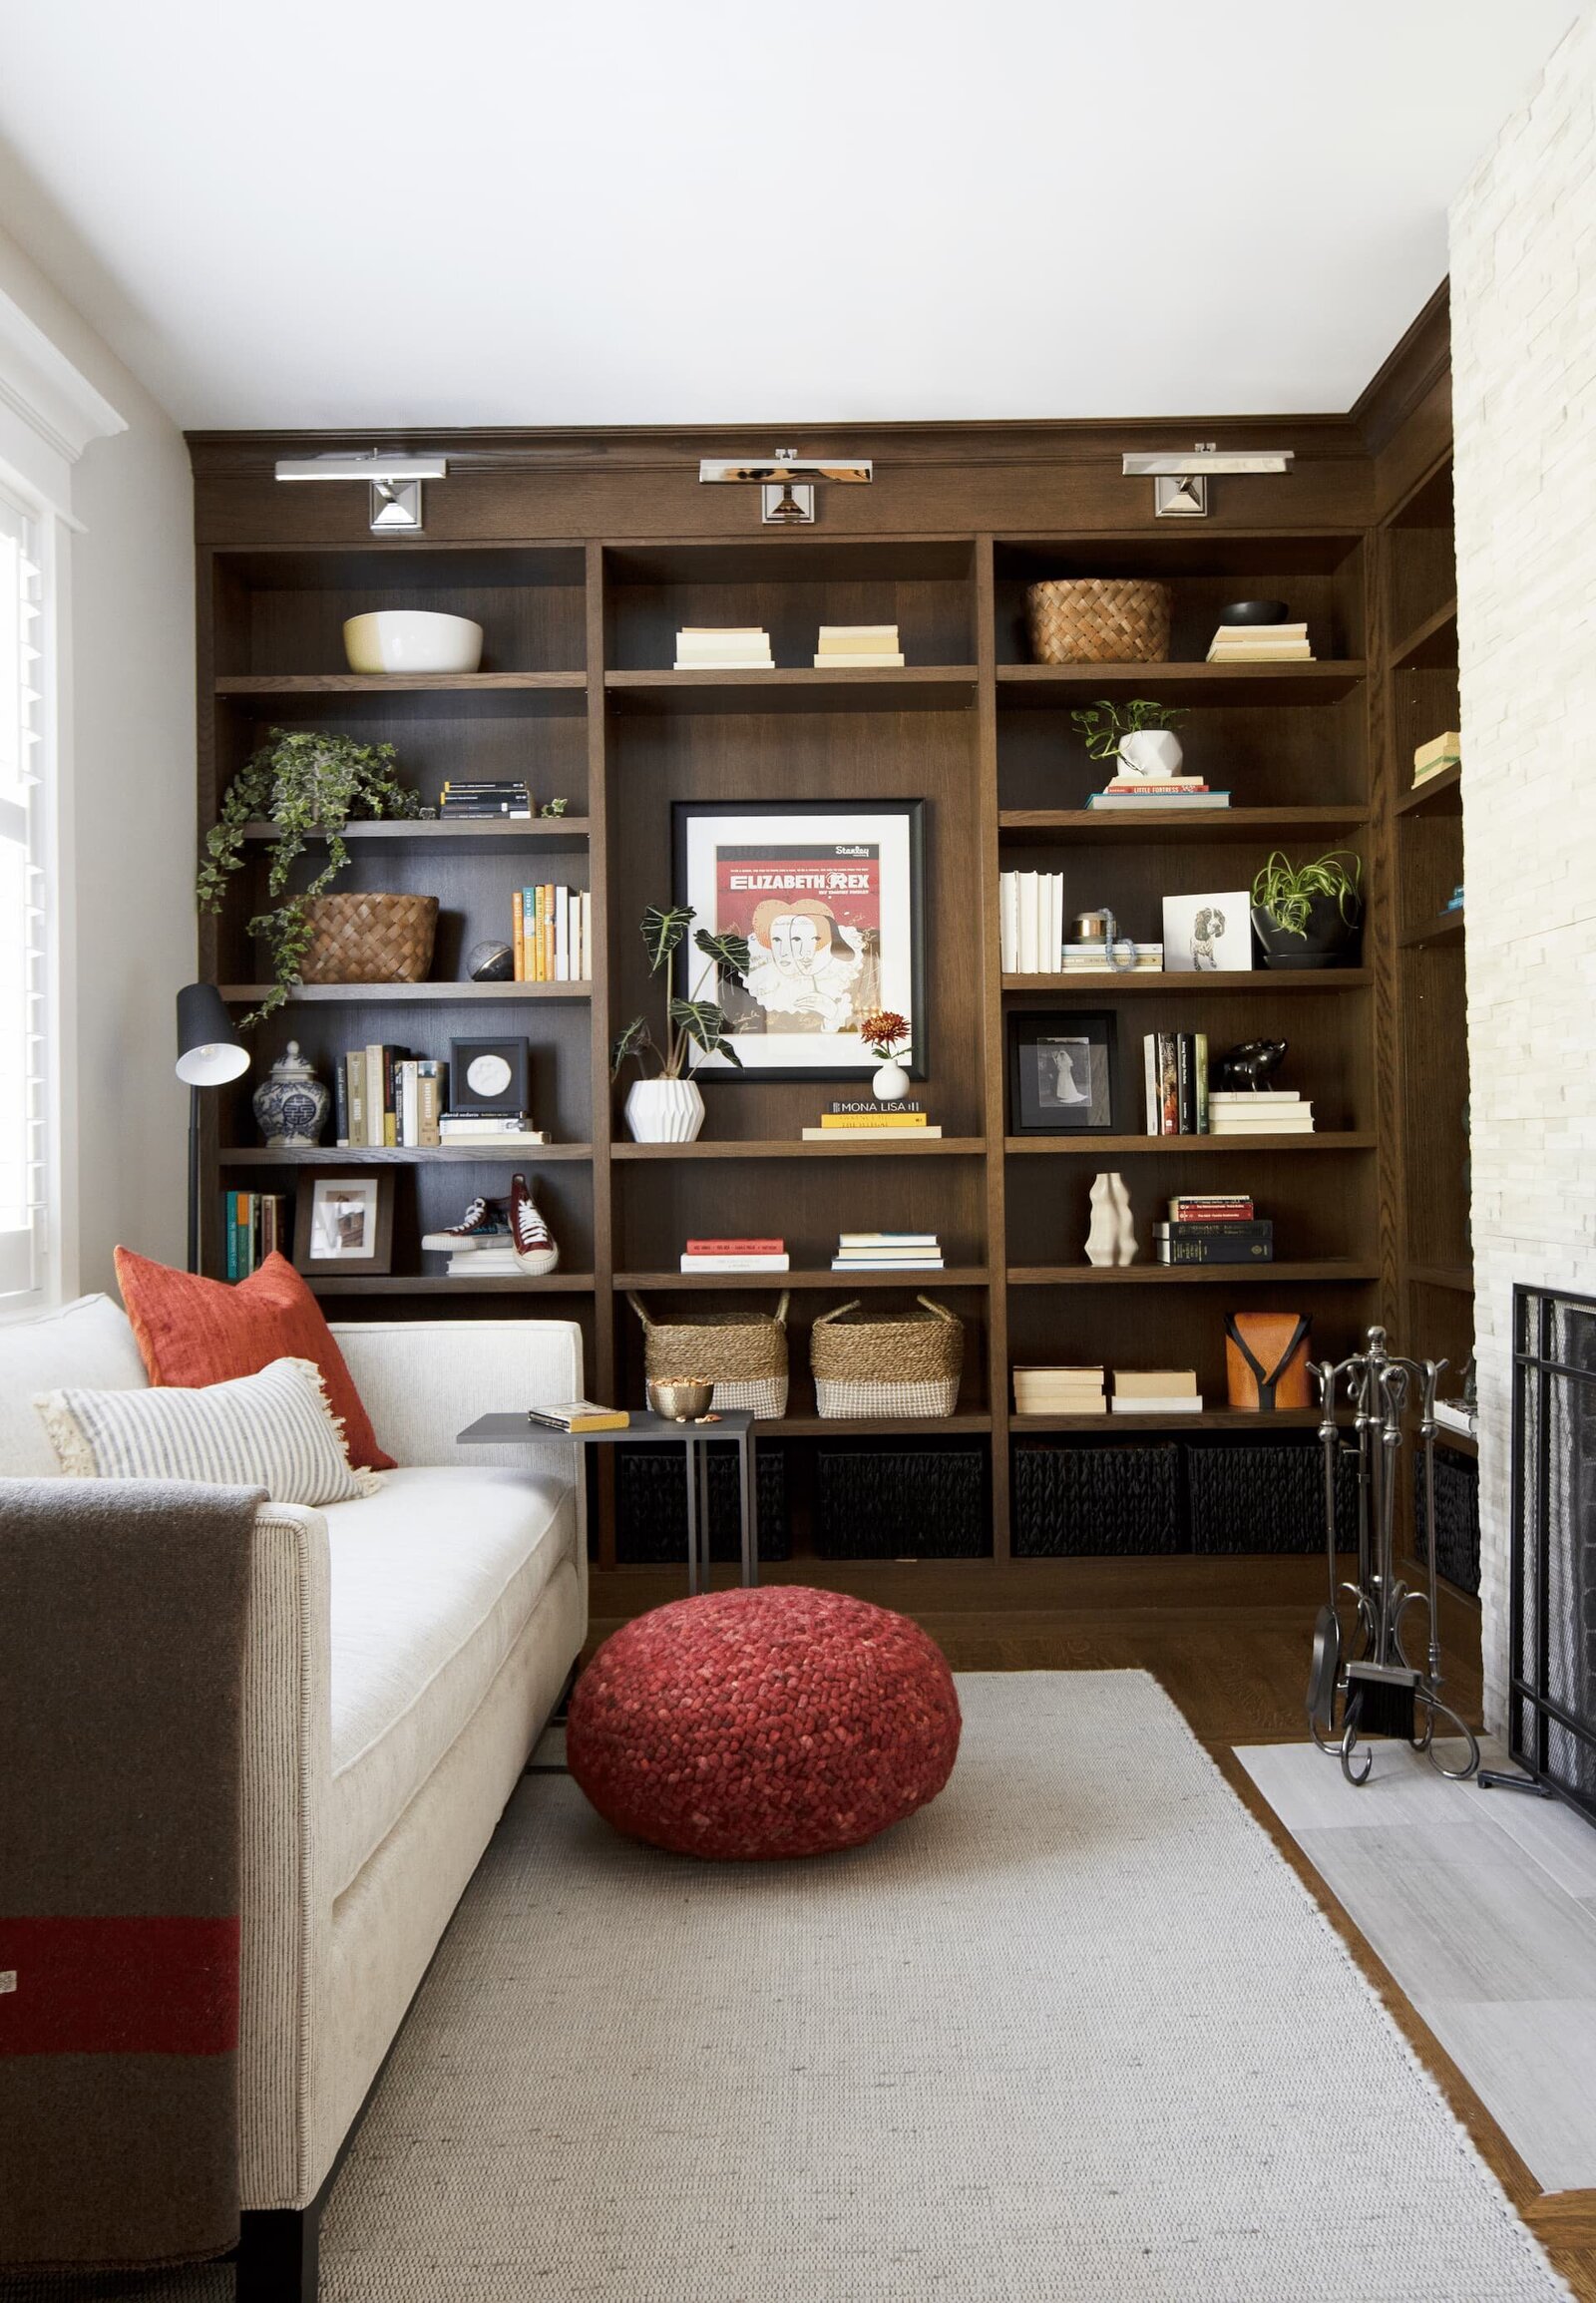 Granville Street l Den-Reading Room l Neutral Sofa, Fireplace, Dark Built-in with Accessories on Shelves 